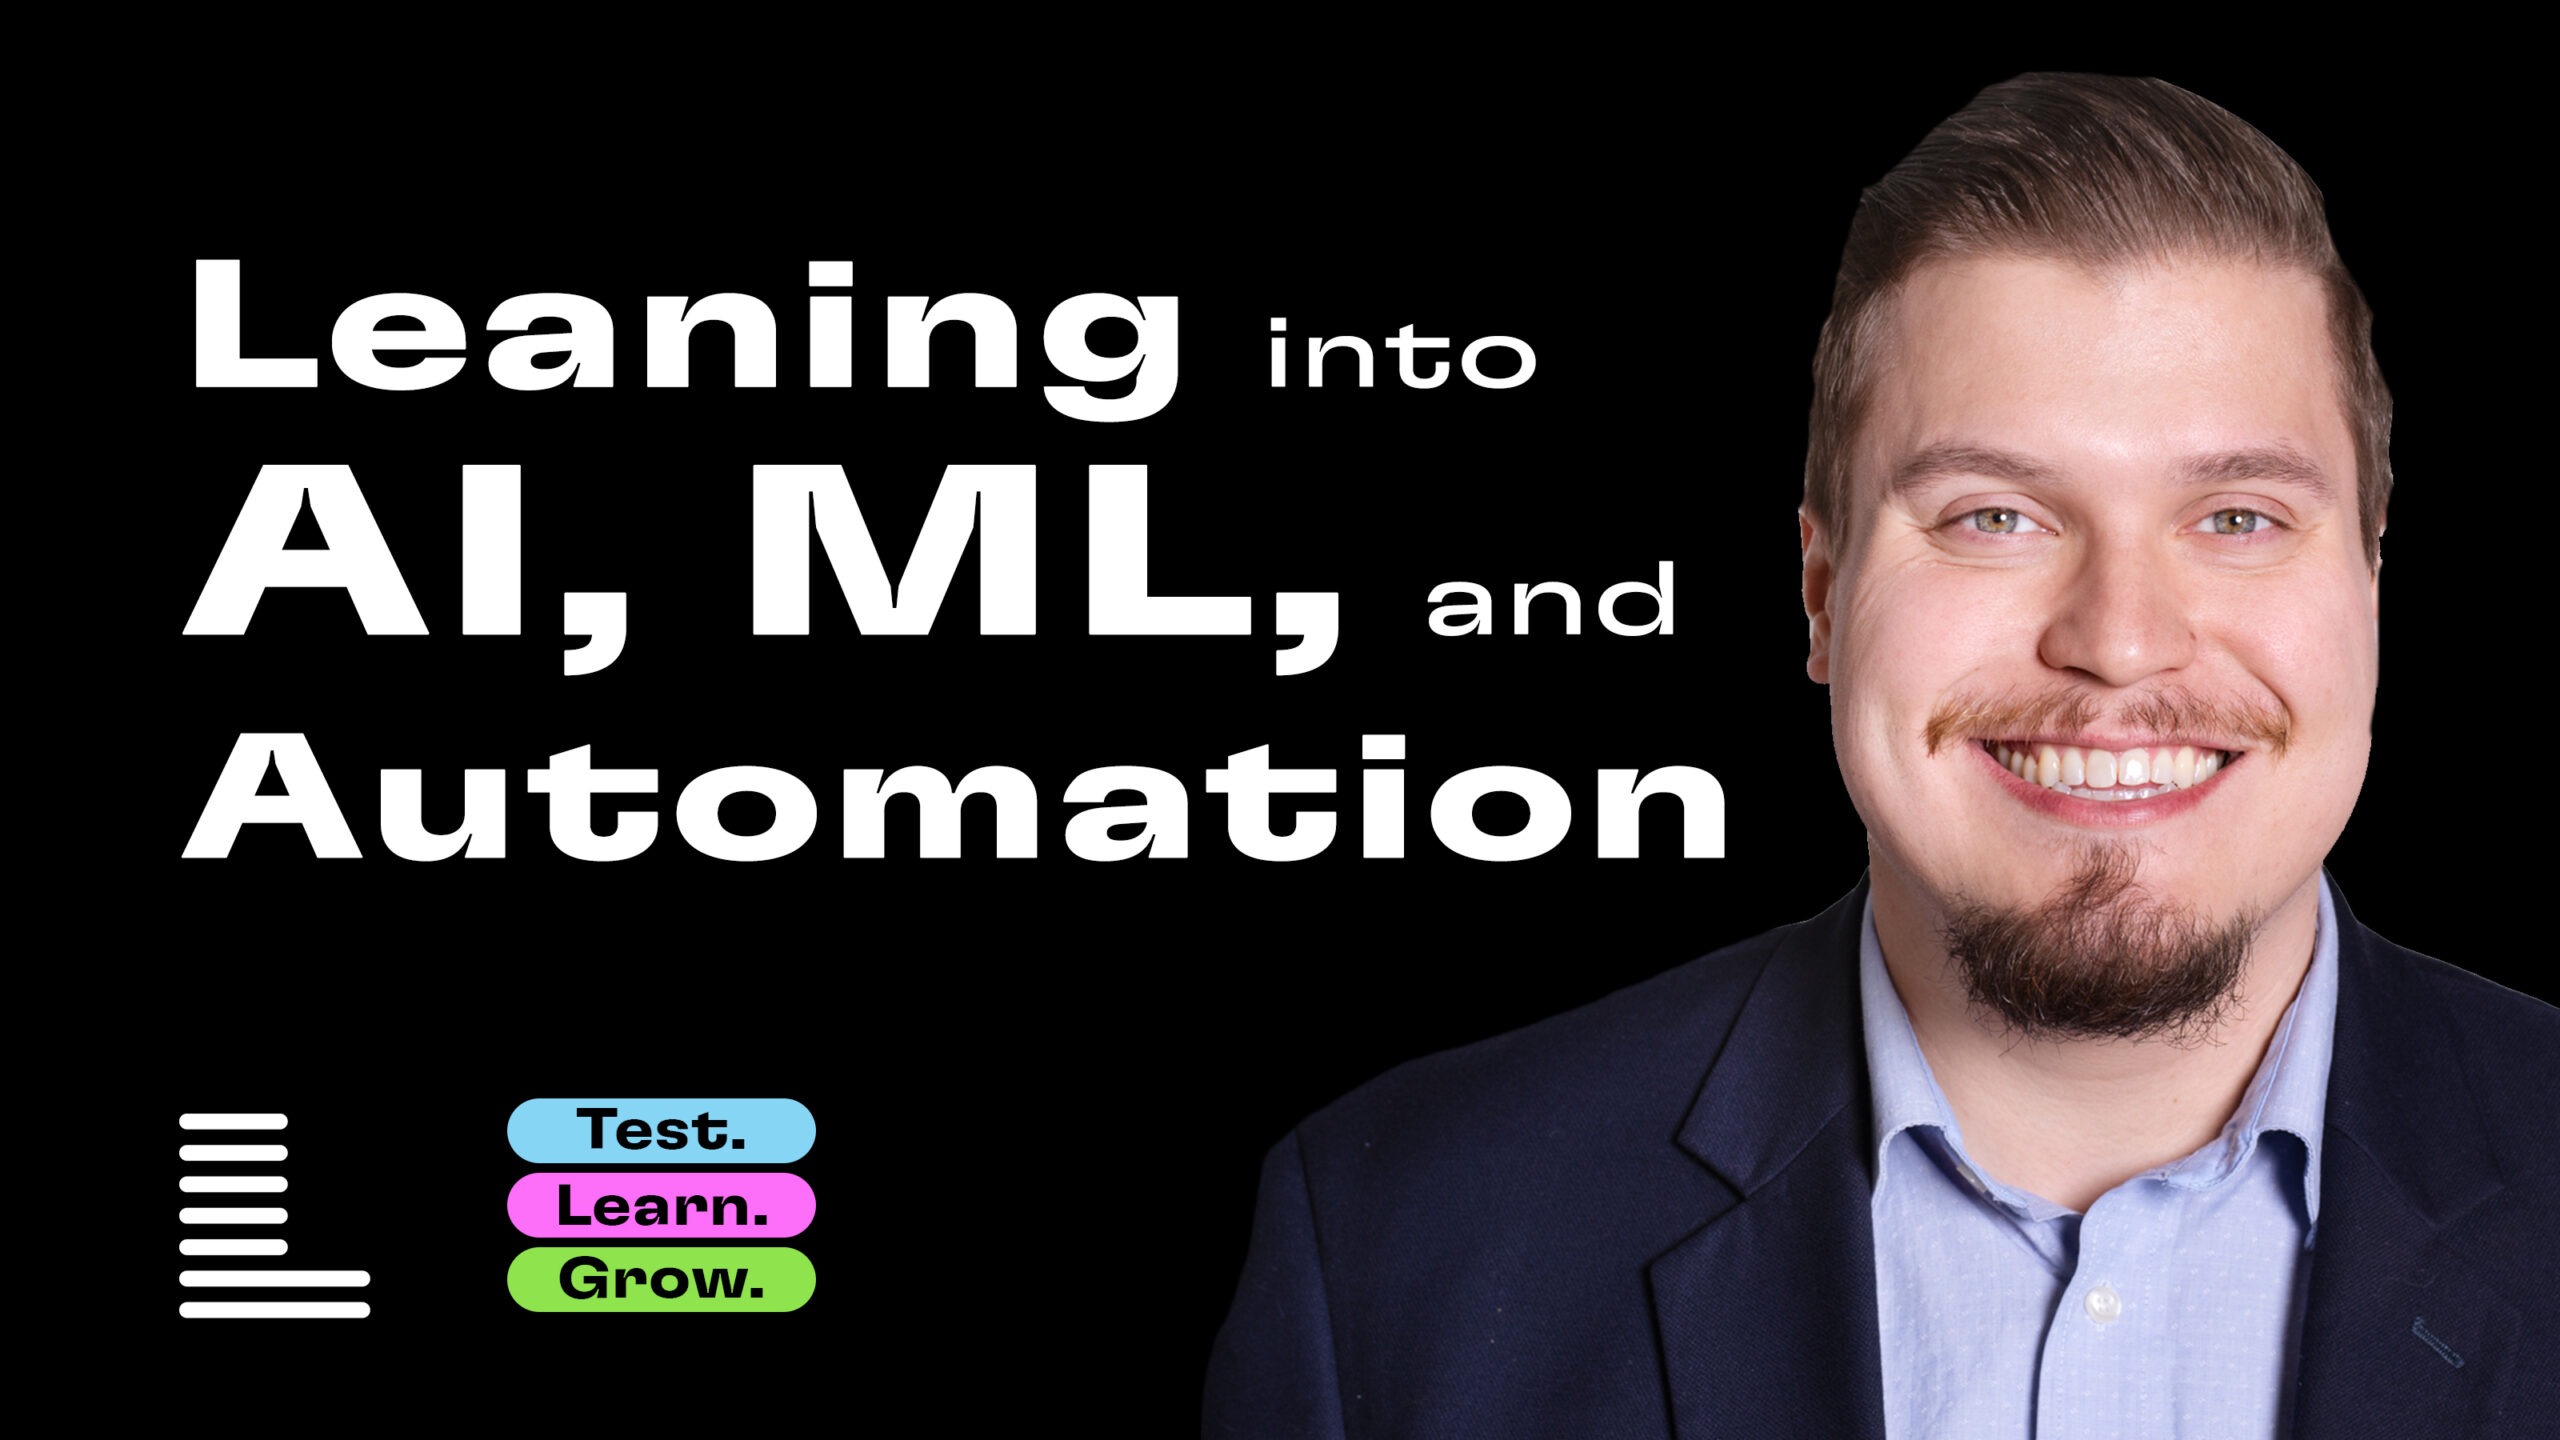 Leaning into AI, ML, and Automation on the Test. Learn. Grow Podcast hosted by Level Agency